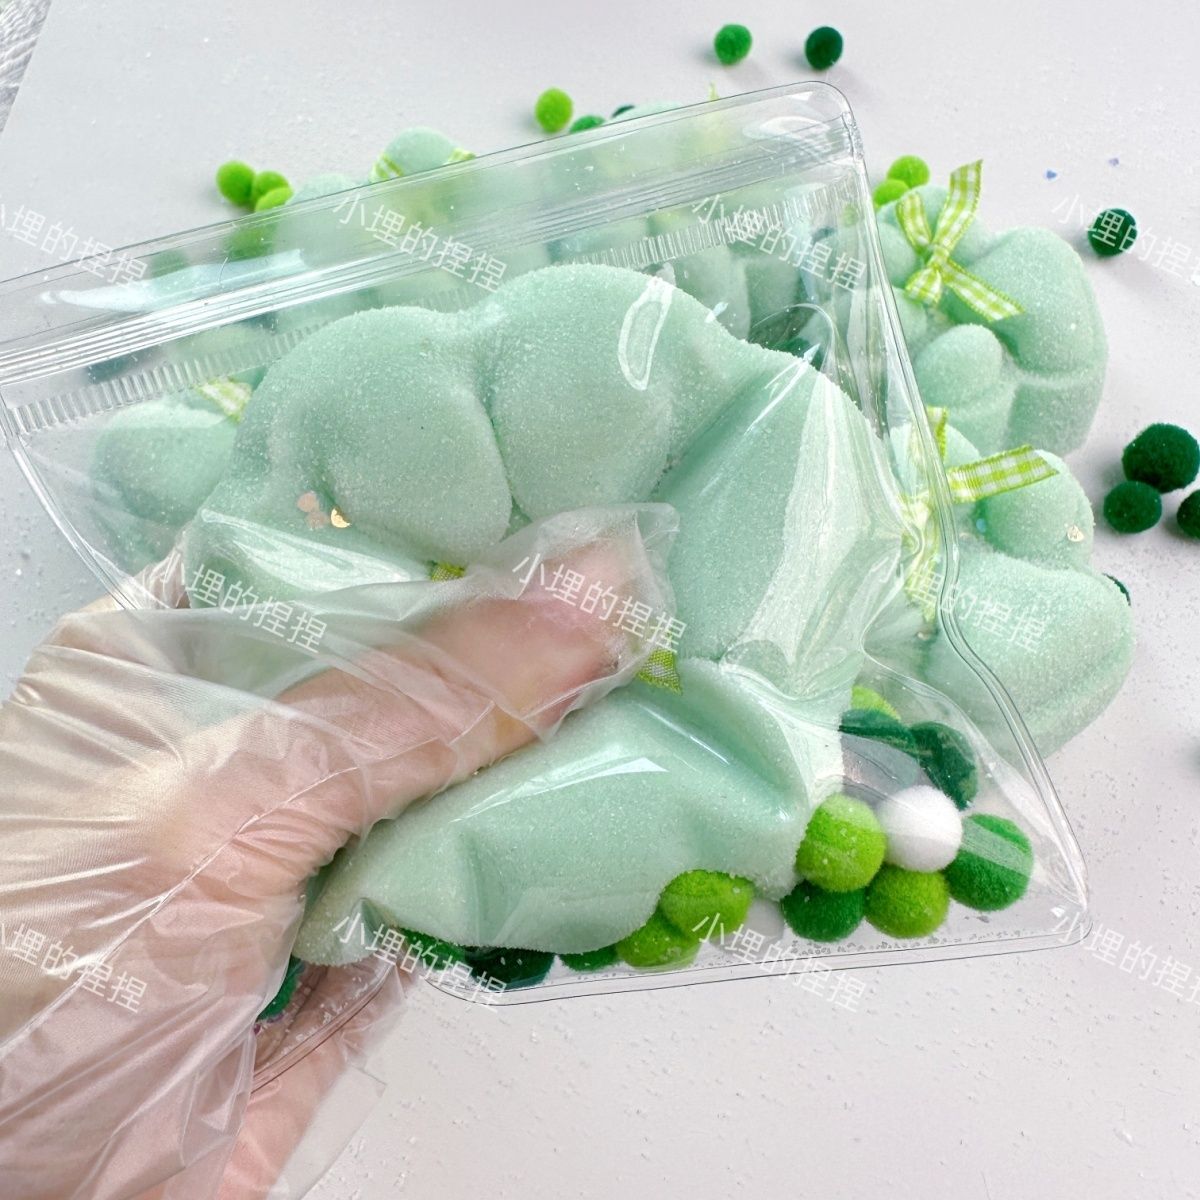 DIY Handmade Silicone Cat Paw without Fur Stress Relief Squeeze Toy Green